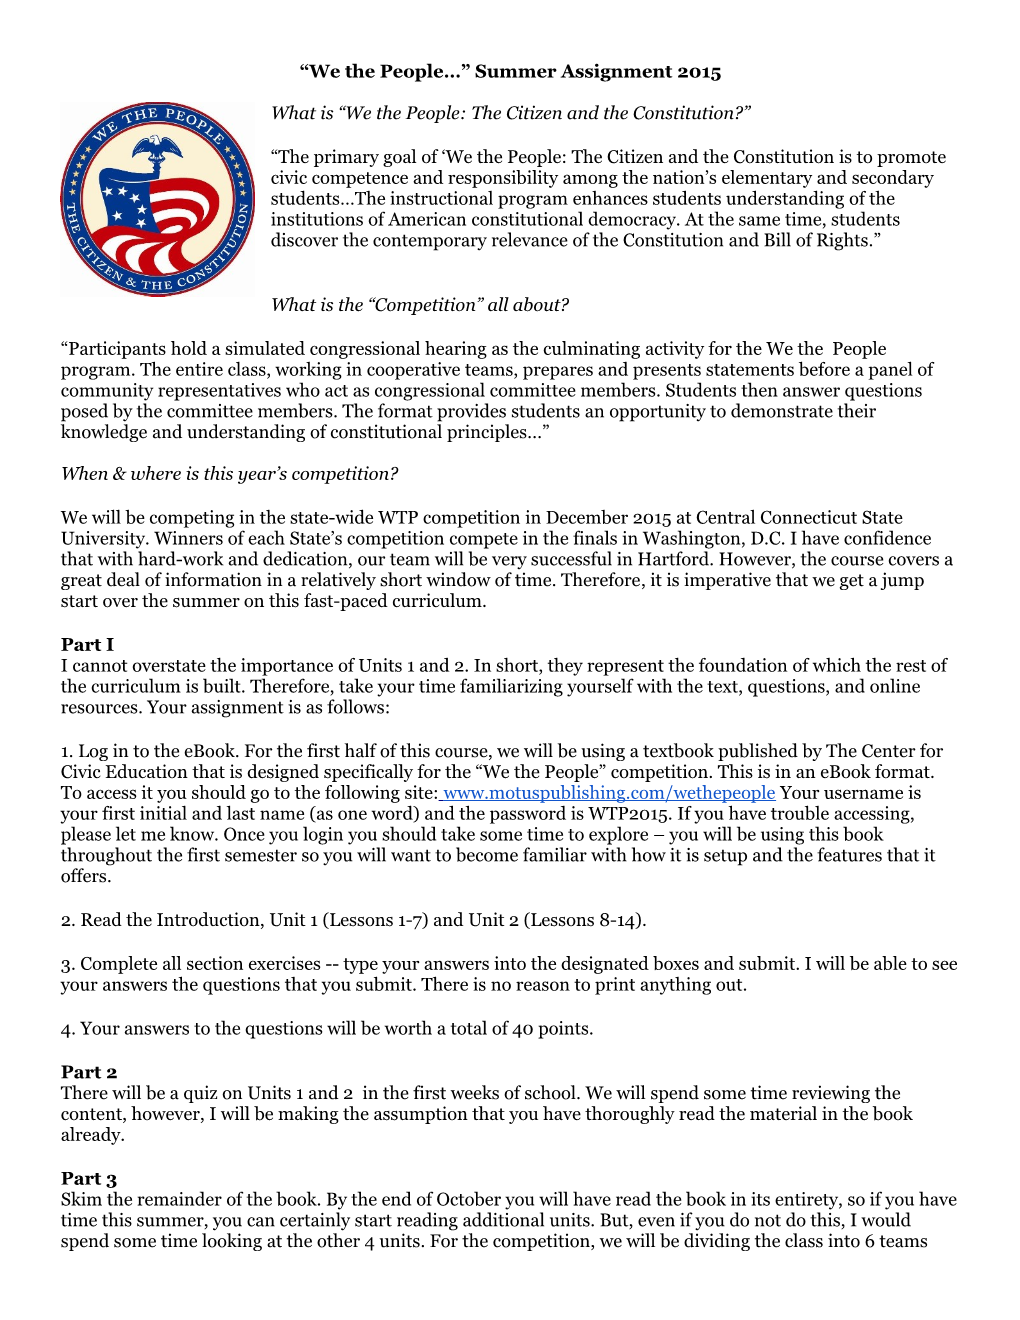 We the People Summer Assignment 2015